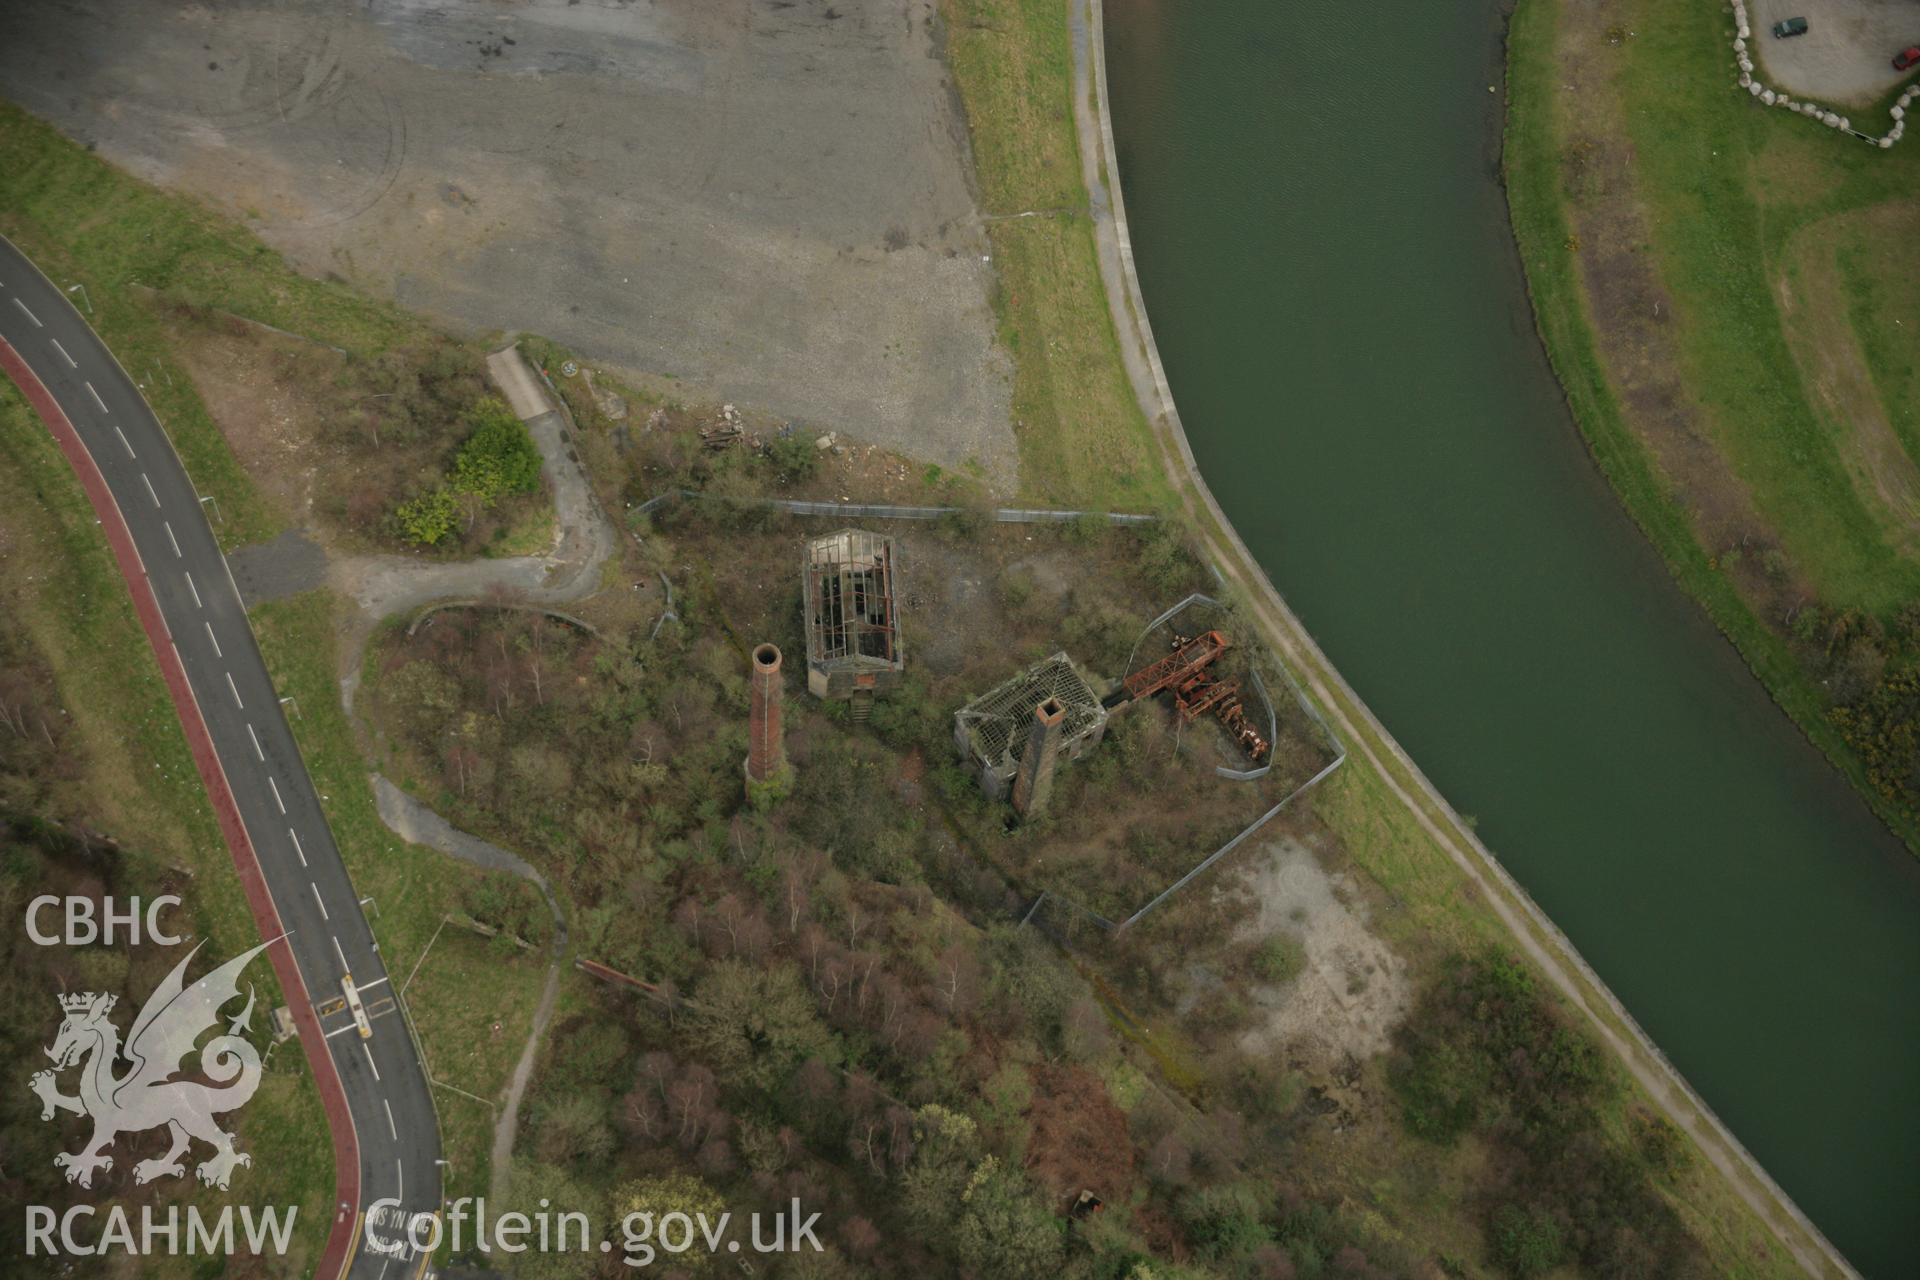 RCAHMW colour oblique aerial photograph of Hafod Copperworks 1910 Engine House, Swansea. Taken on 16 March 2007 by Toby Driver